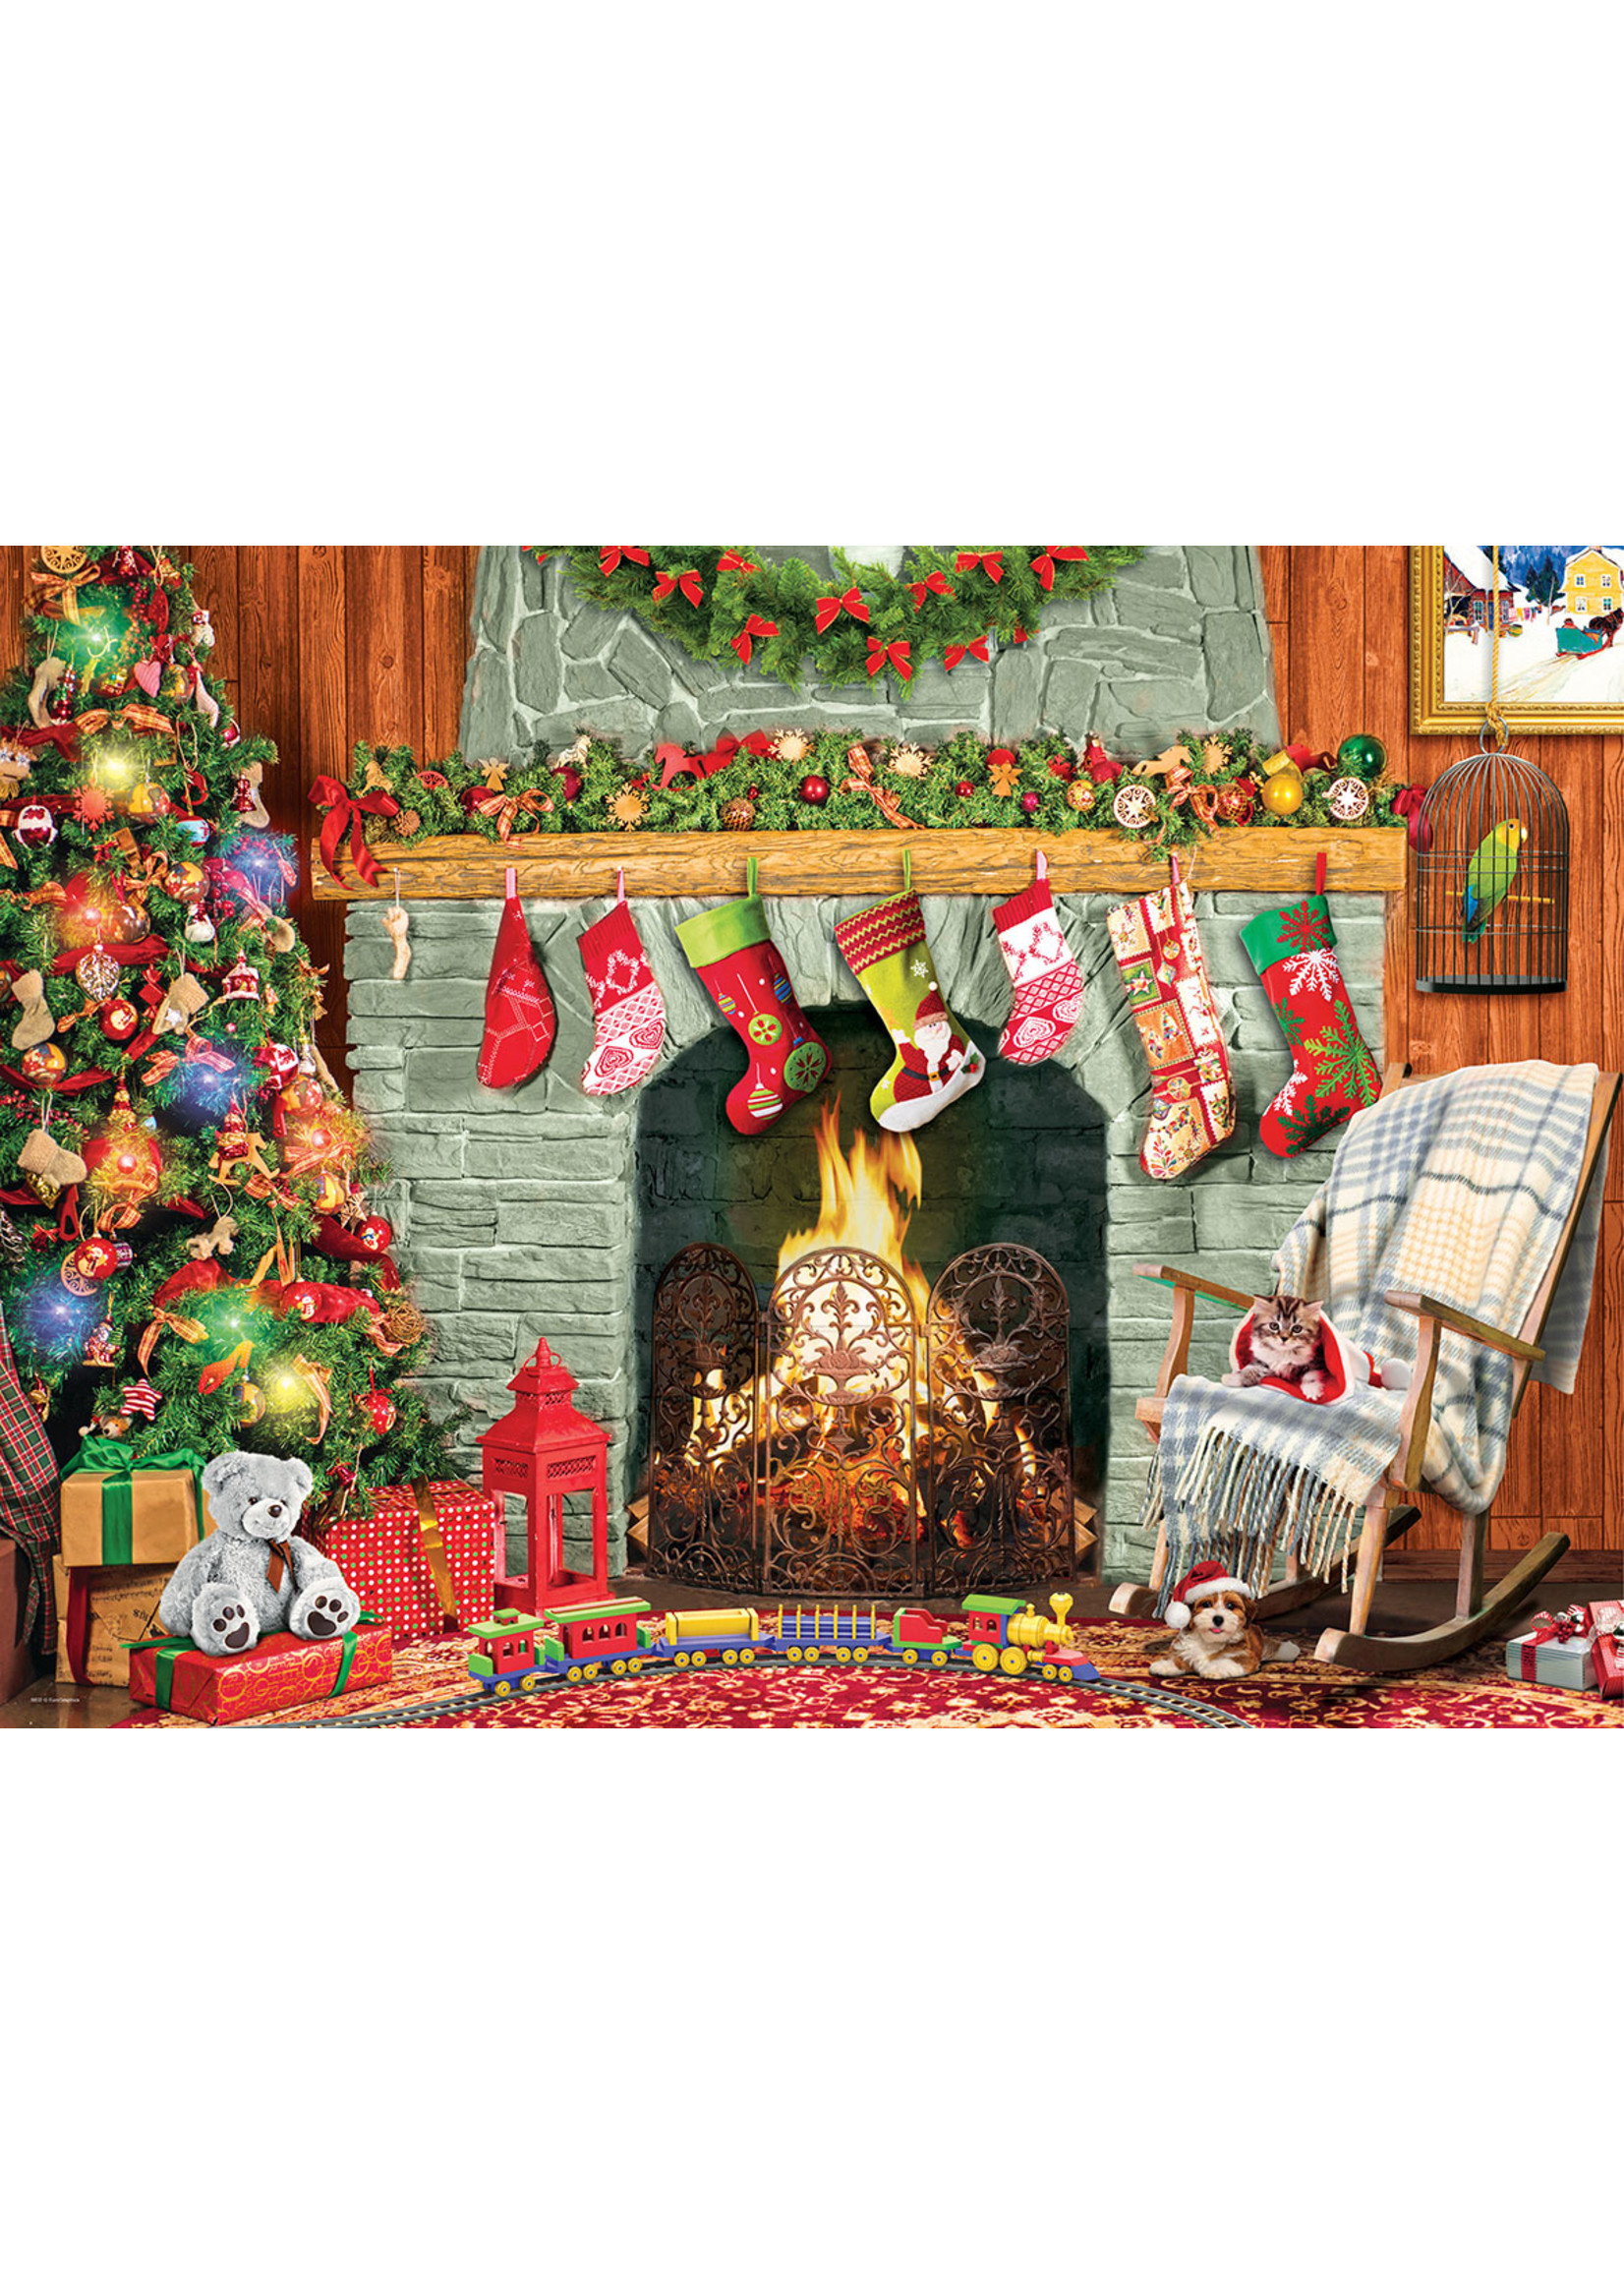 Eurographics Christmas by the Fireplace - 500 Piece Puzzle